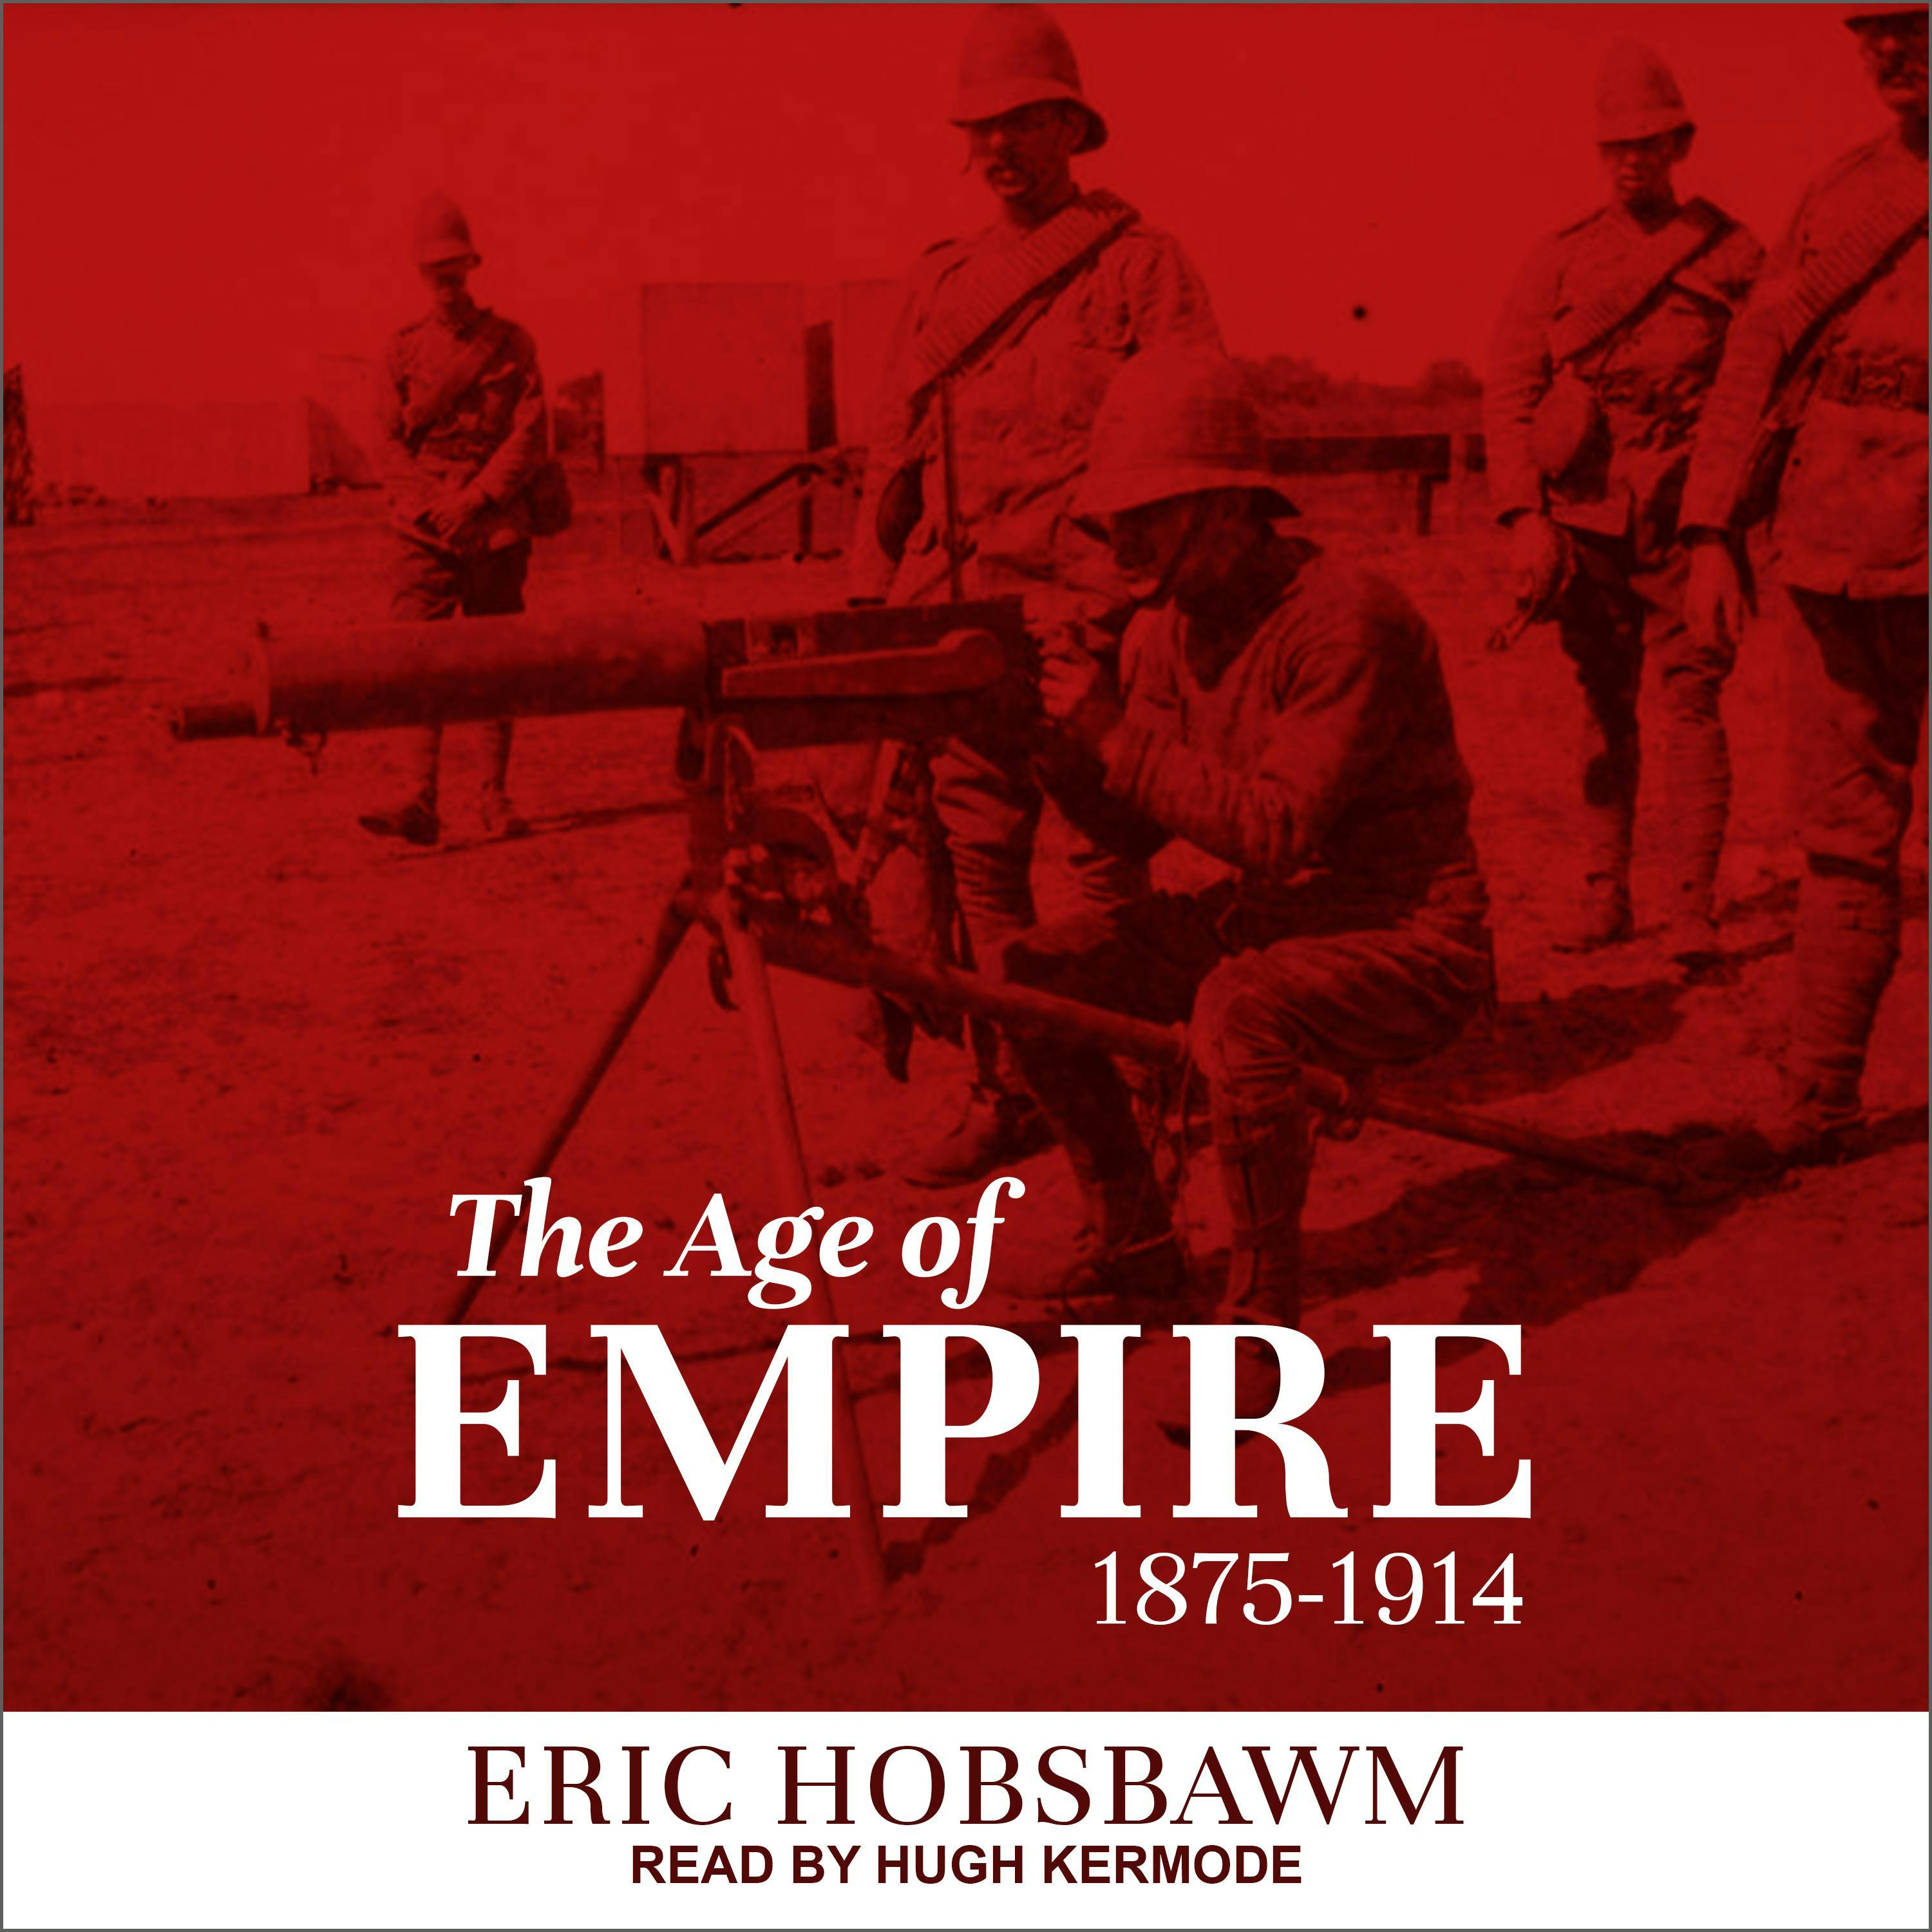 The Age of Empire: 1875-1914 - Eric Hobsbawm